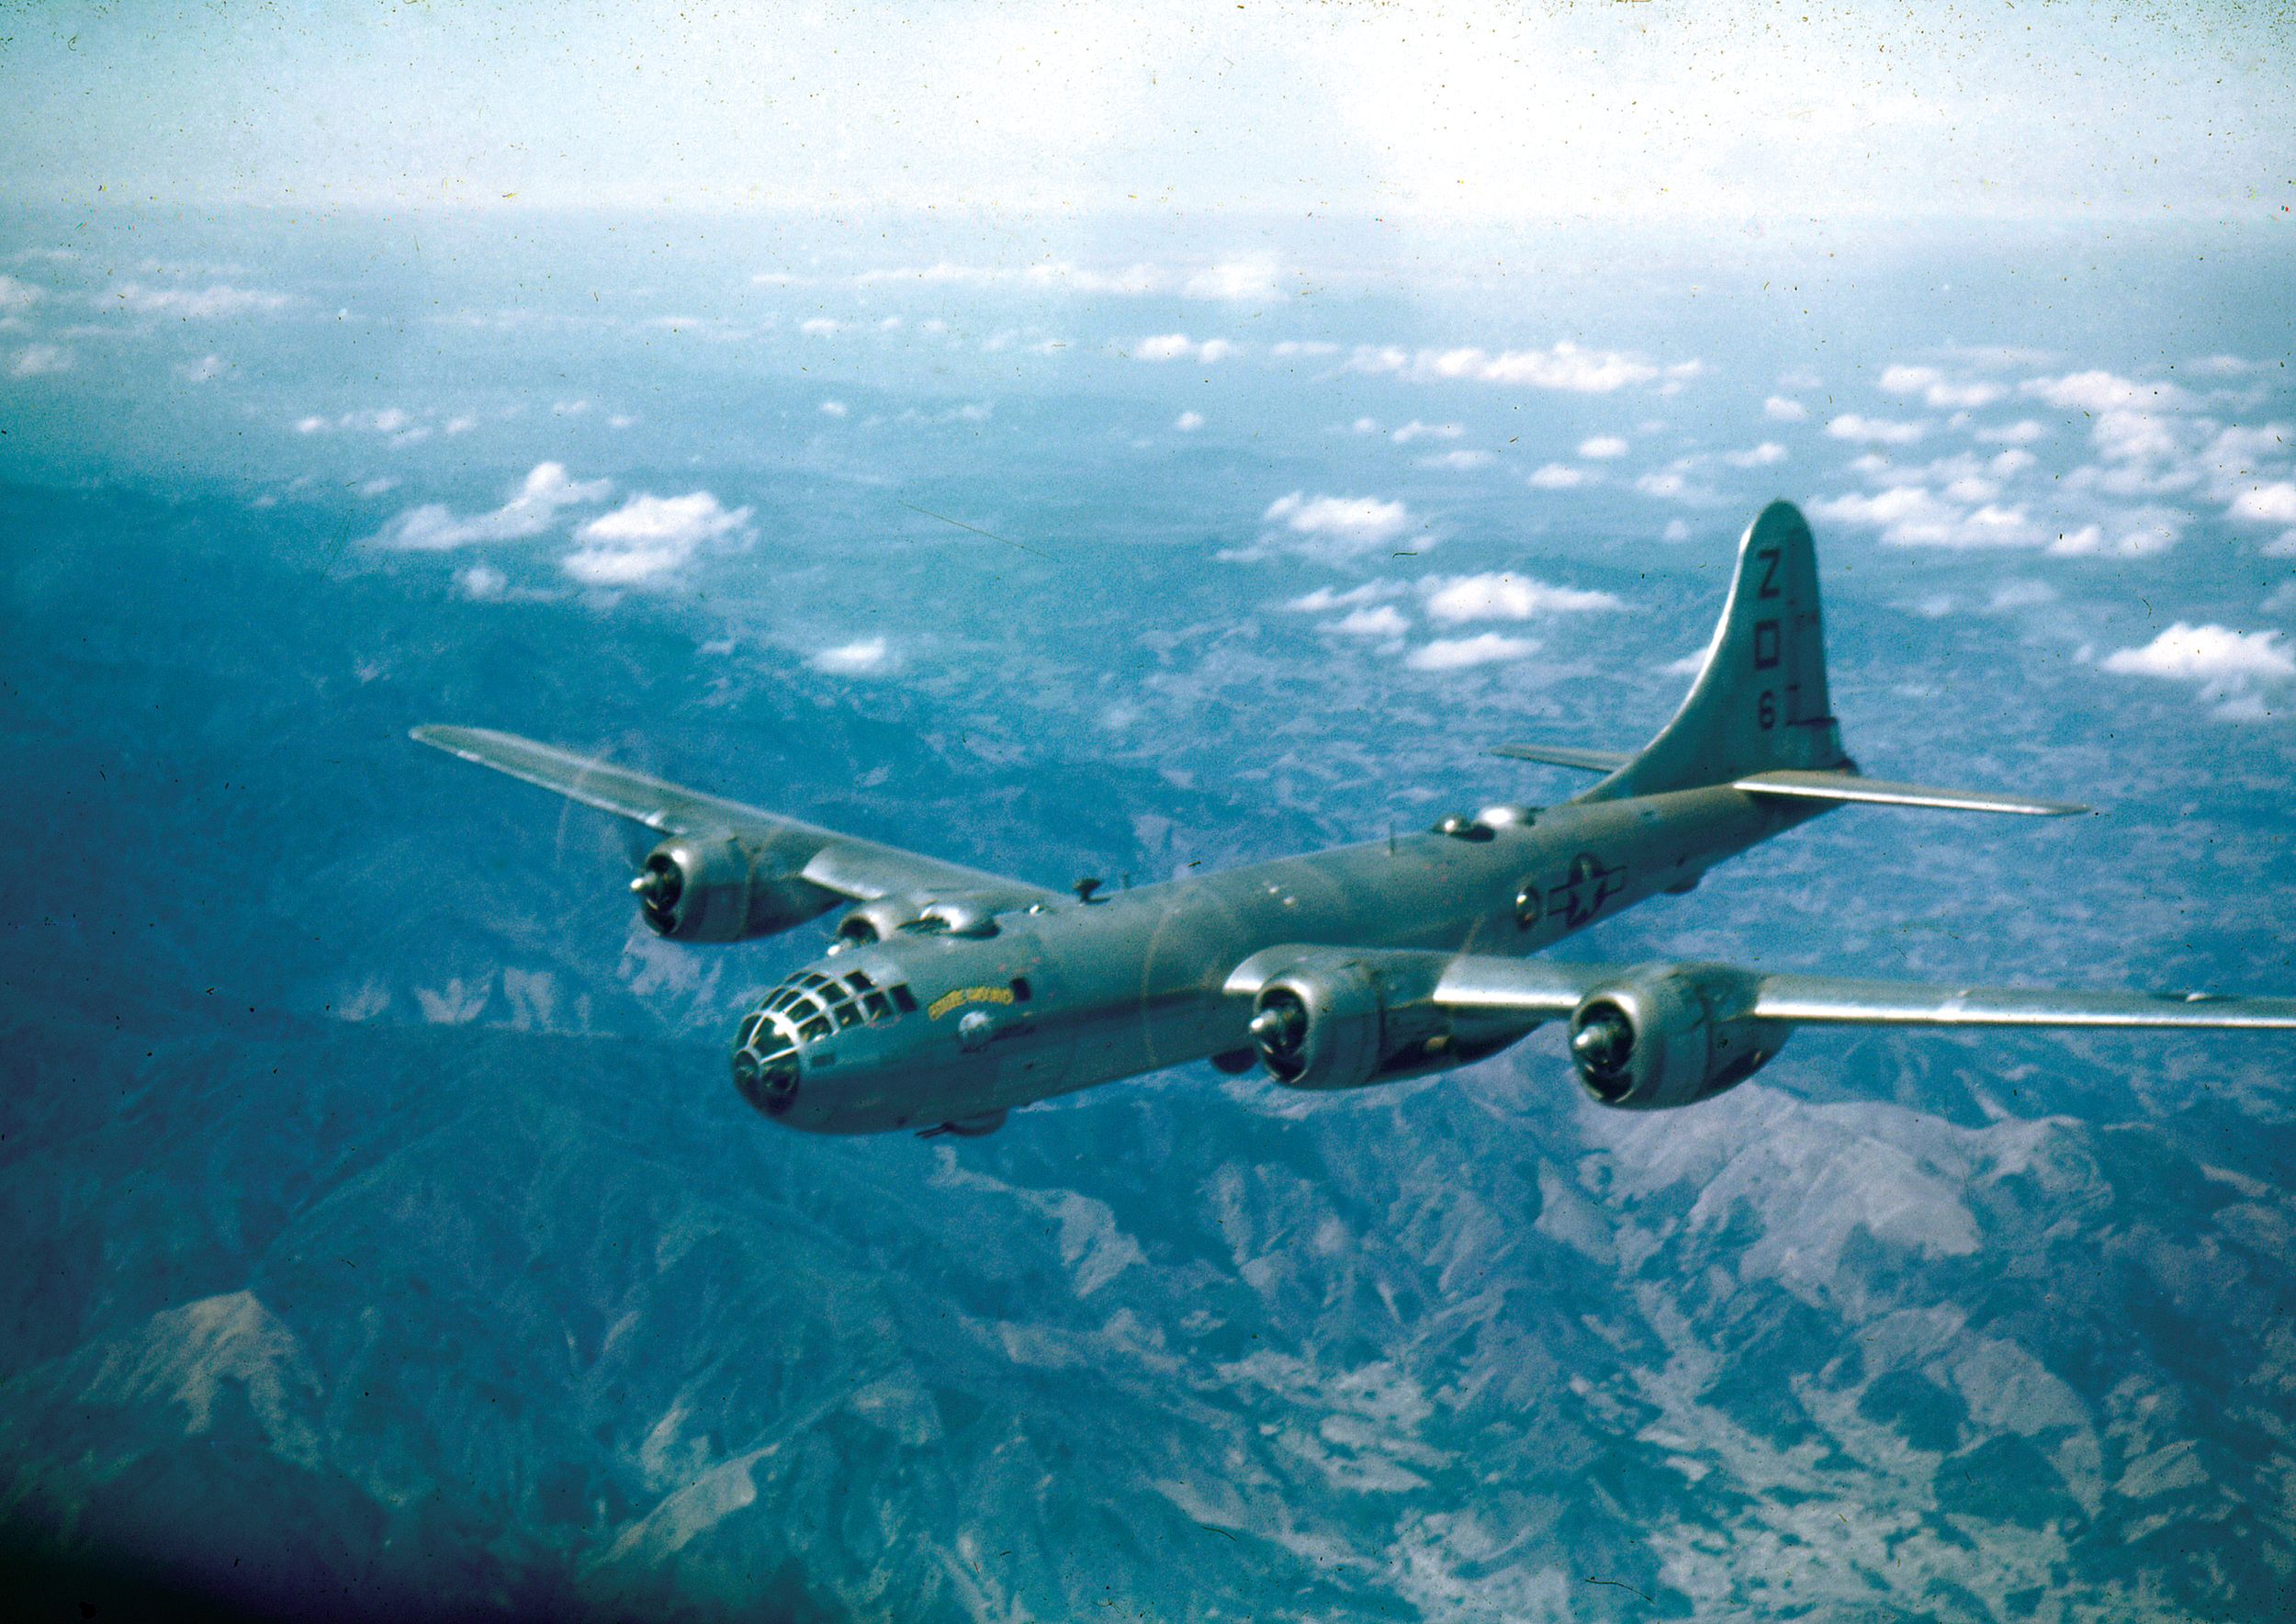 This Boeing B-29 Superfortress nicknamed “Booze Hound” flies over the island of Saipan in the Marianas in 1945. By that time, the Superfortresses had devastated Japanese cities during their sustained bombing campaign, and U.S. Army air power had come of age. In 1947, the Air Corps became the United States Air Force.